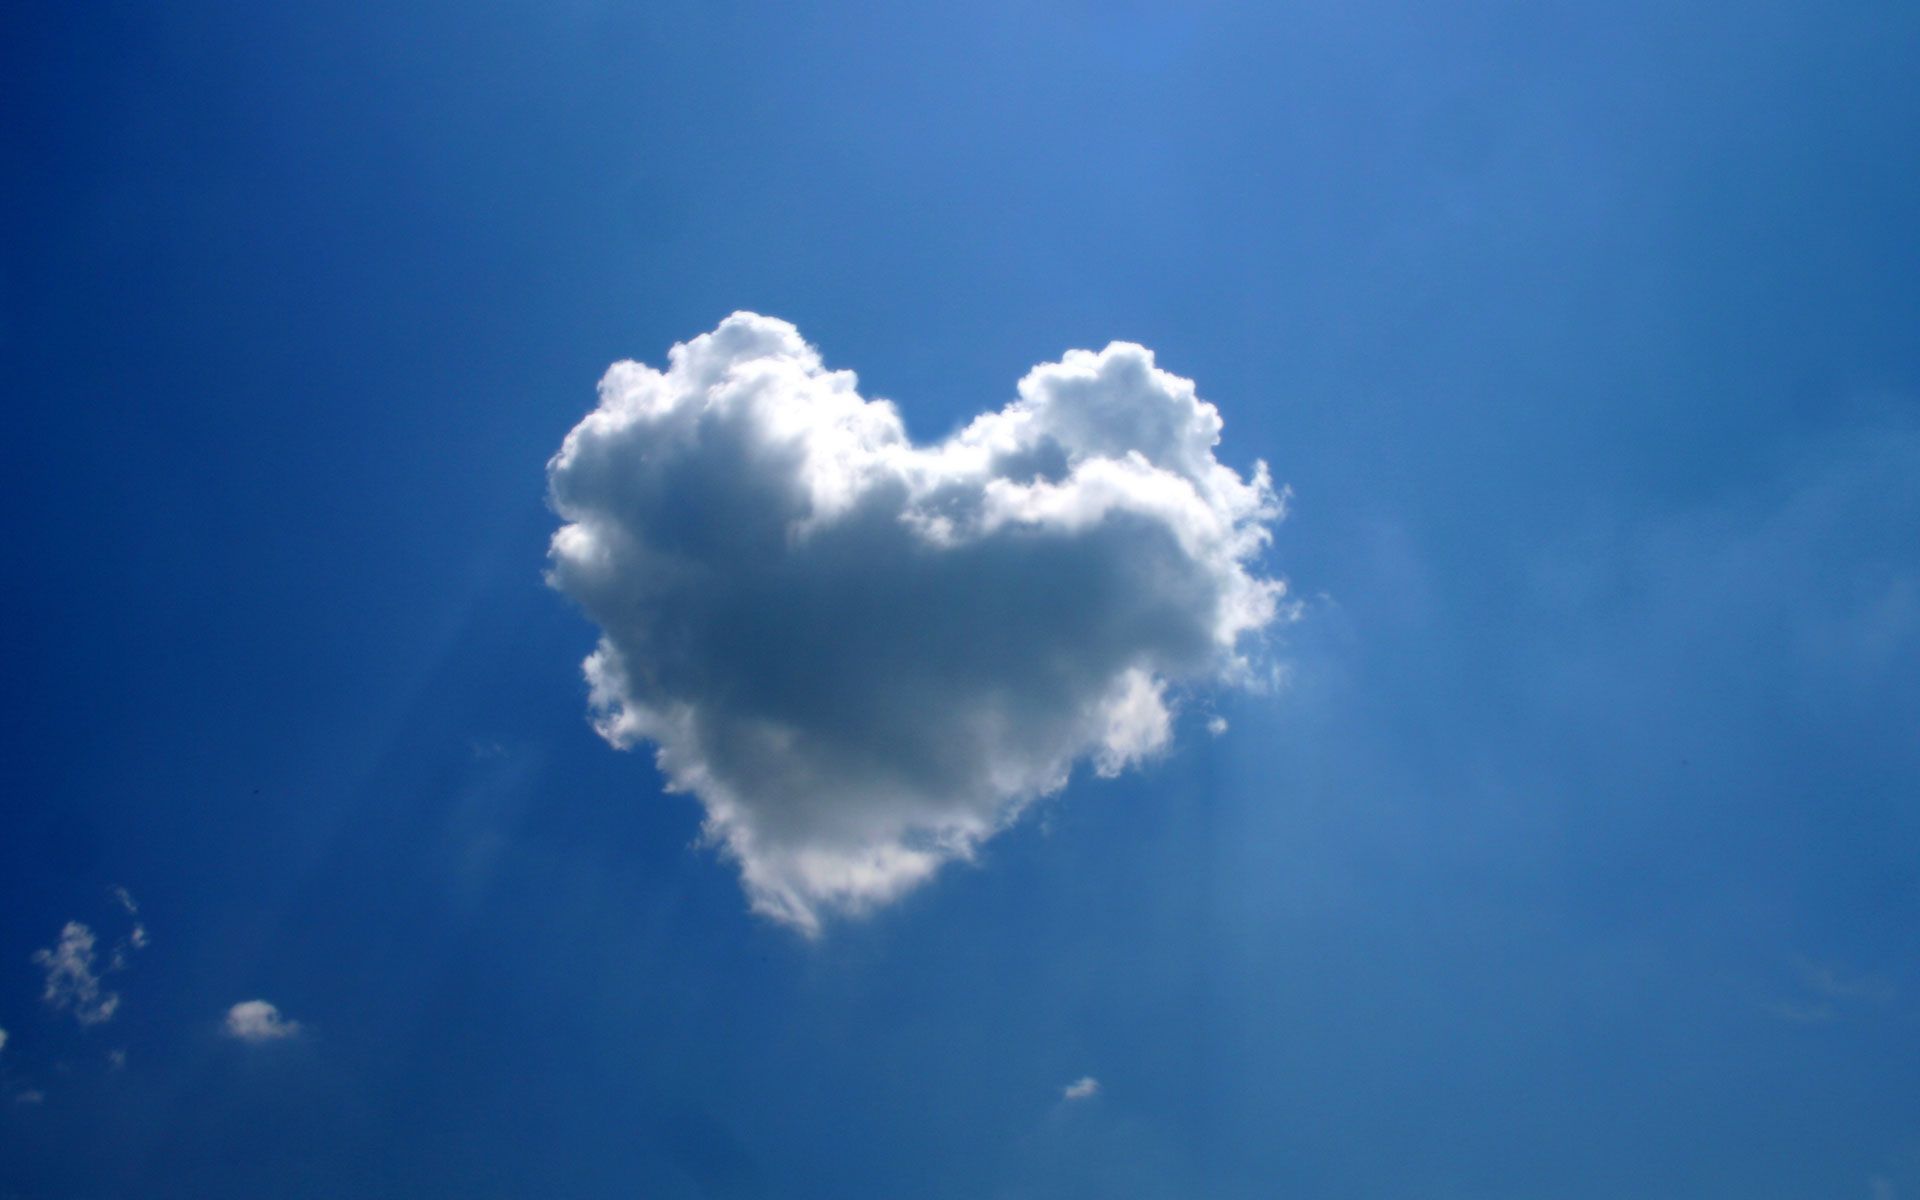 Image detail for -cloud heart nature wallpaper 1920x1200 not working copy paste wfiles. Clouds, Heart in nature, Nature